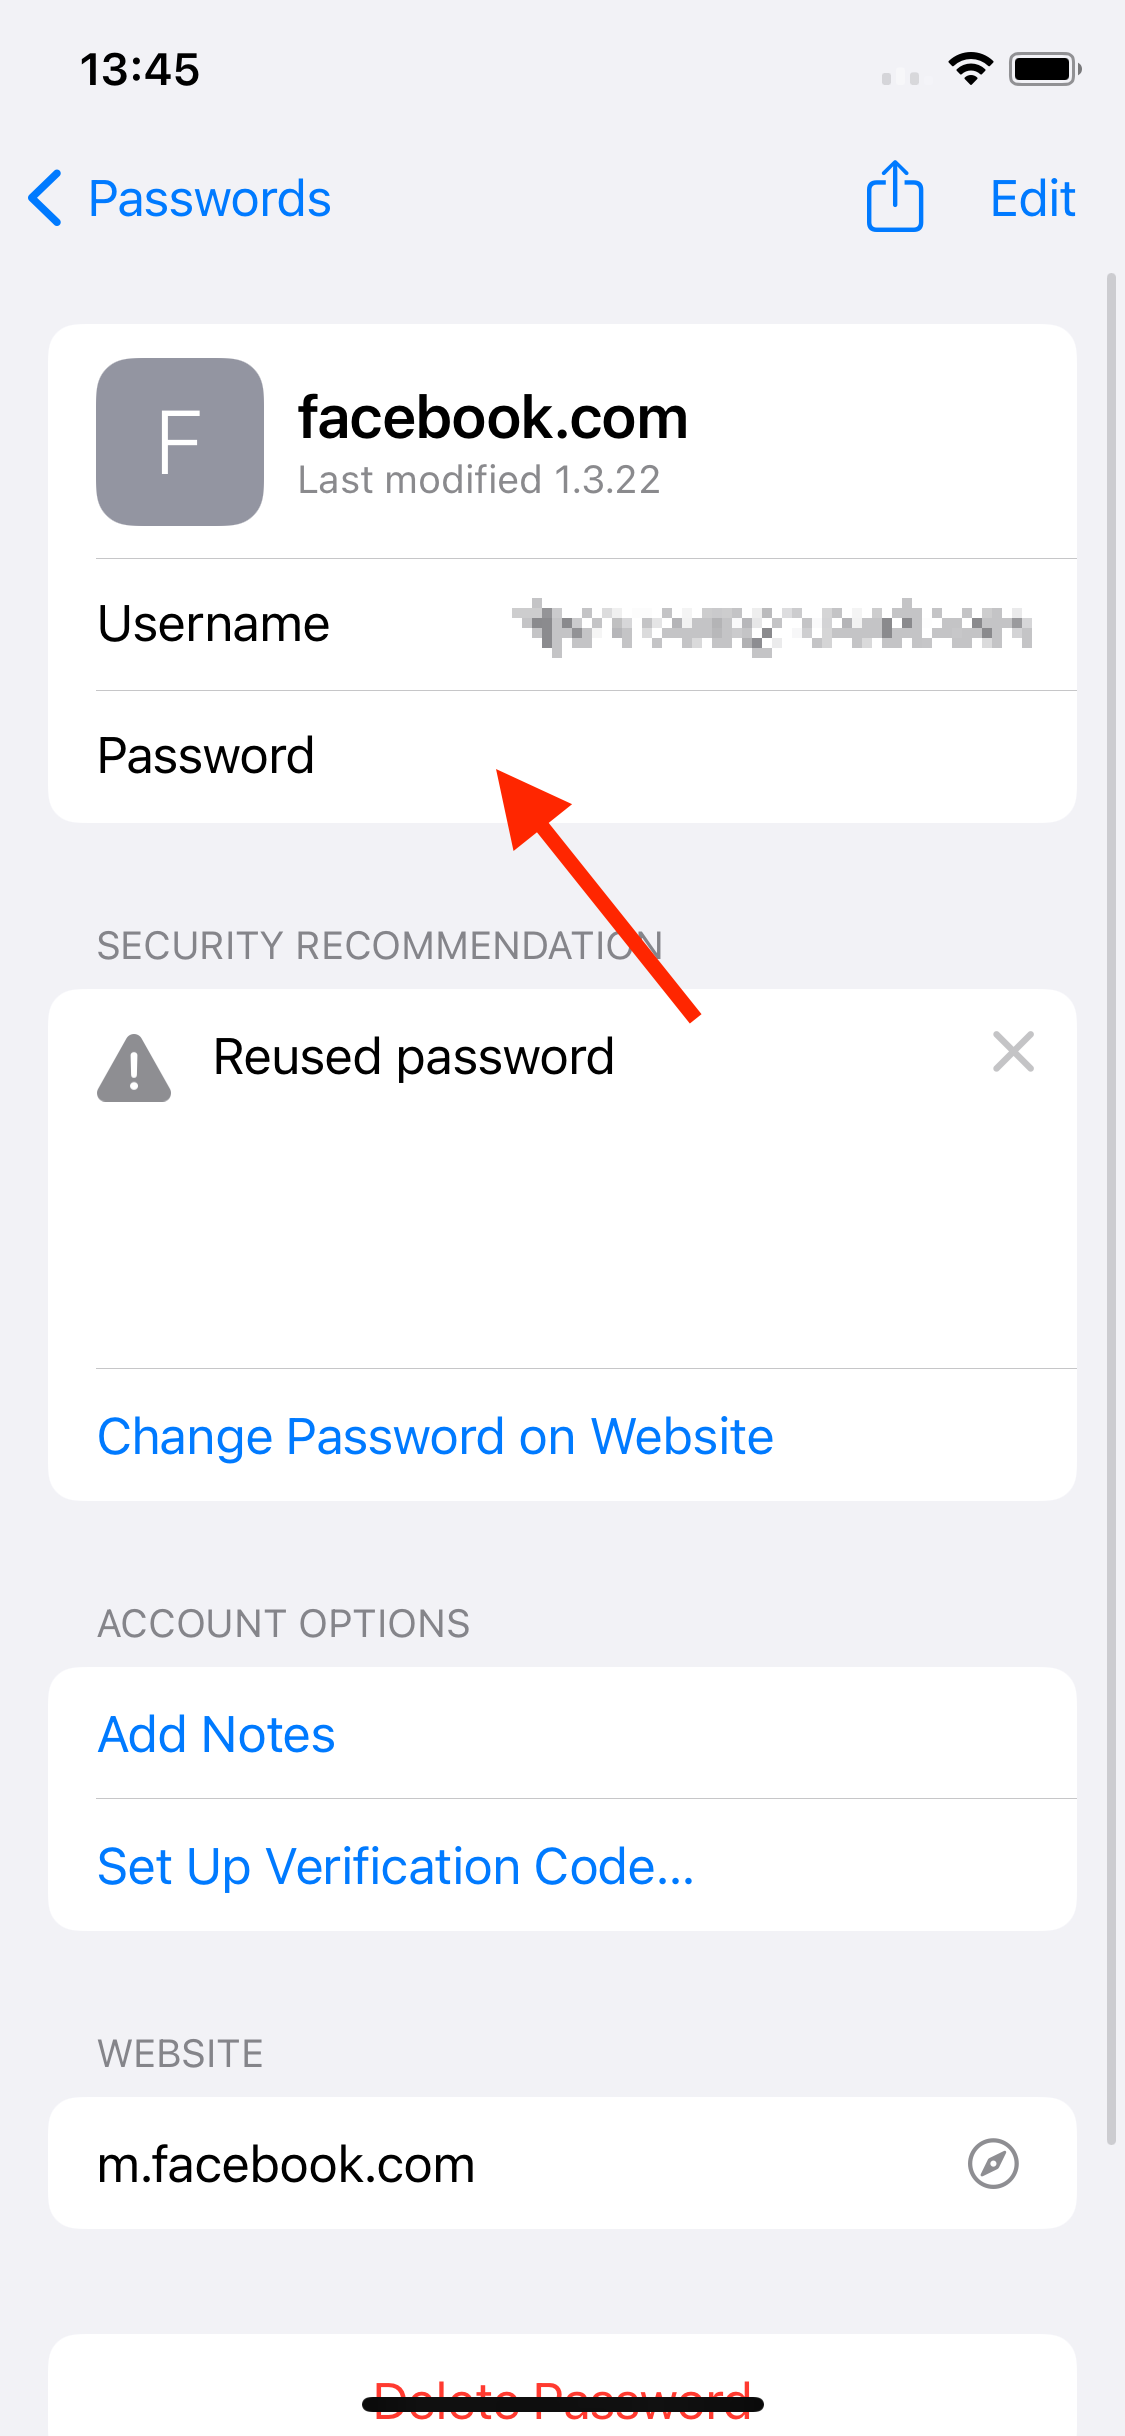 Tap on the password field